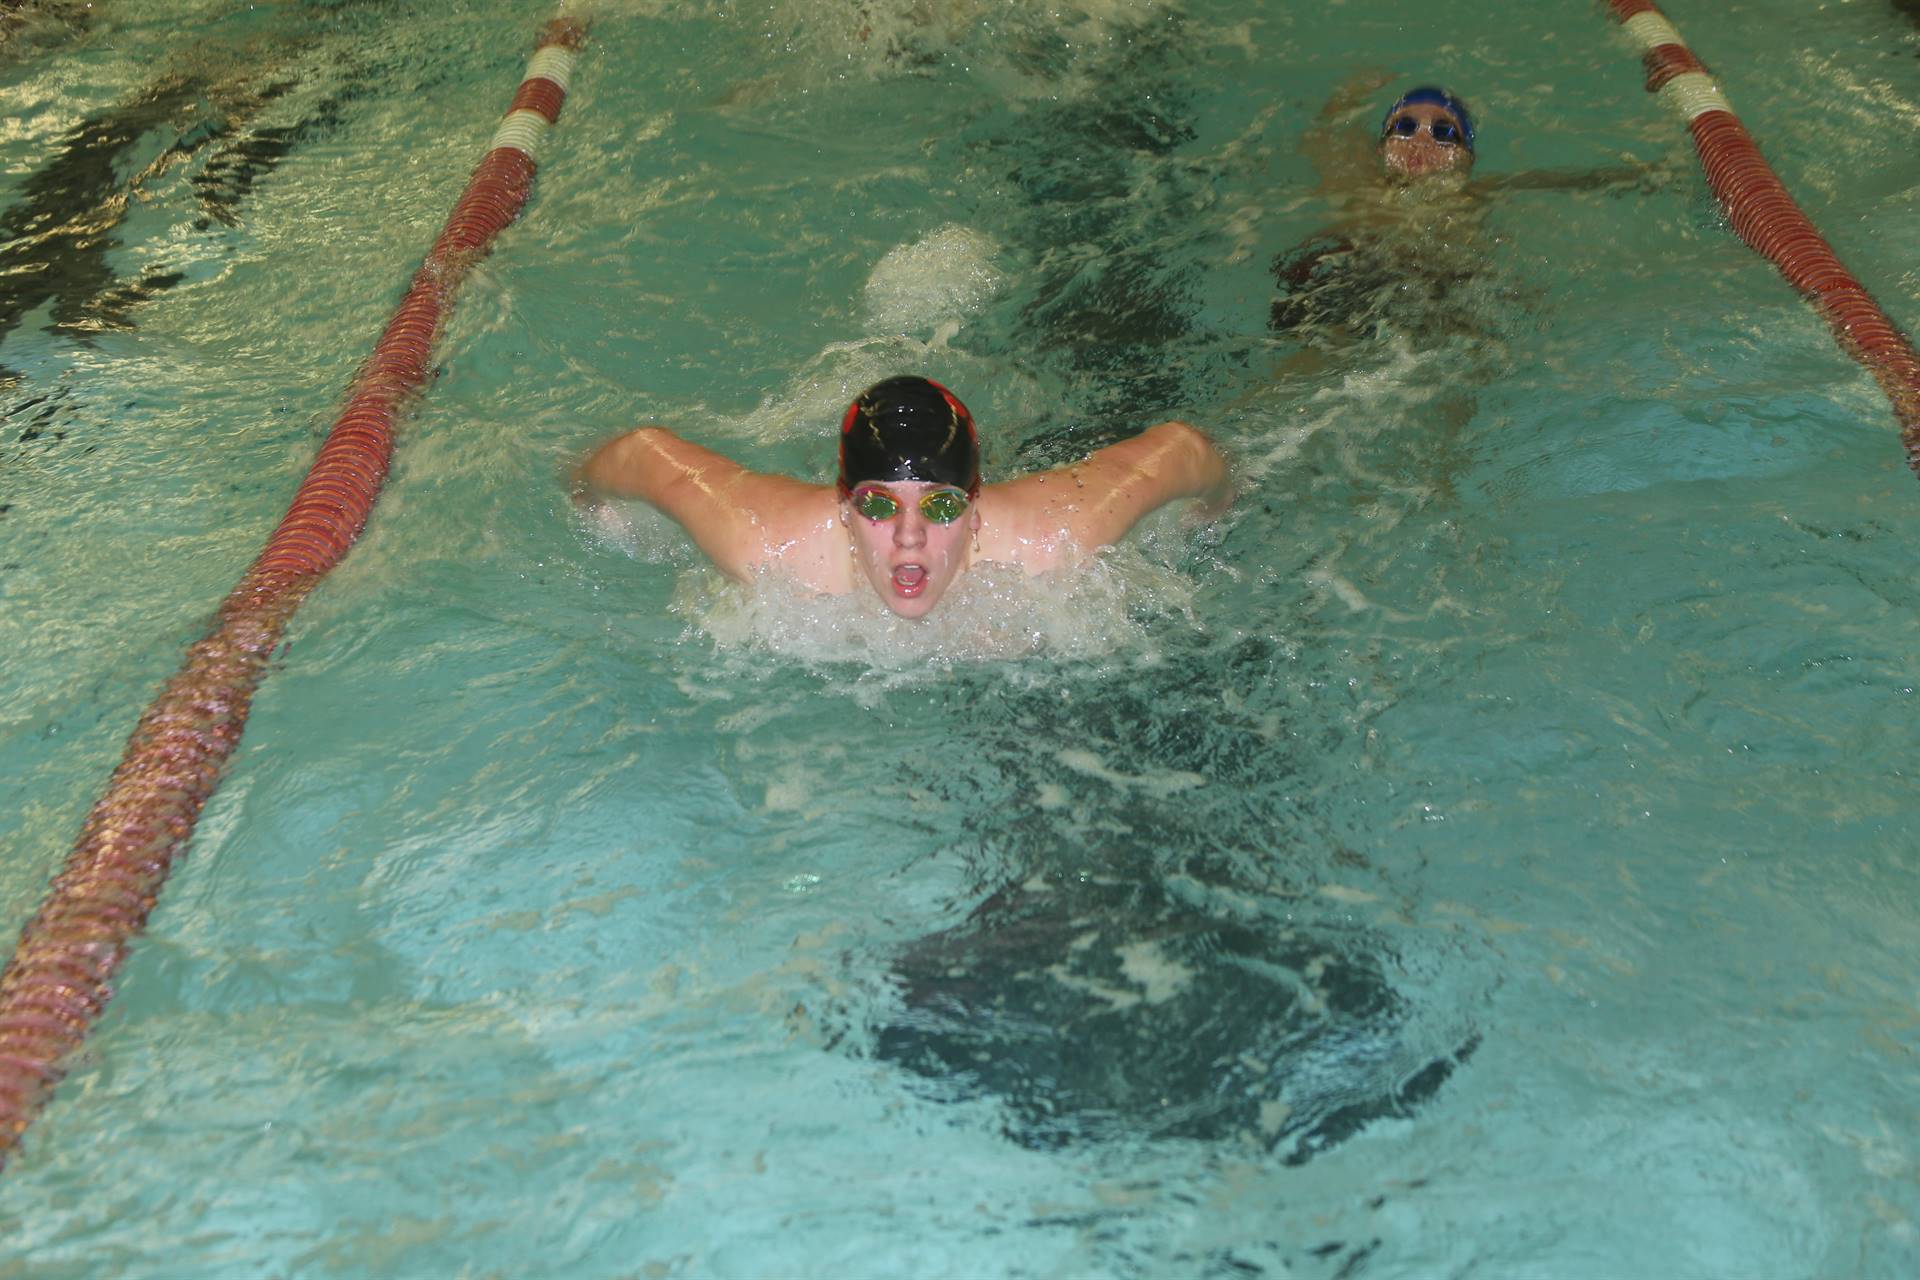 swimmer doing butterfly and another in lane doing back stroke